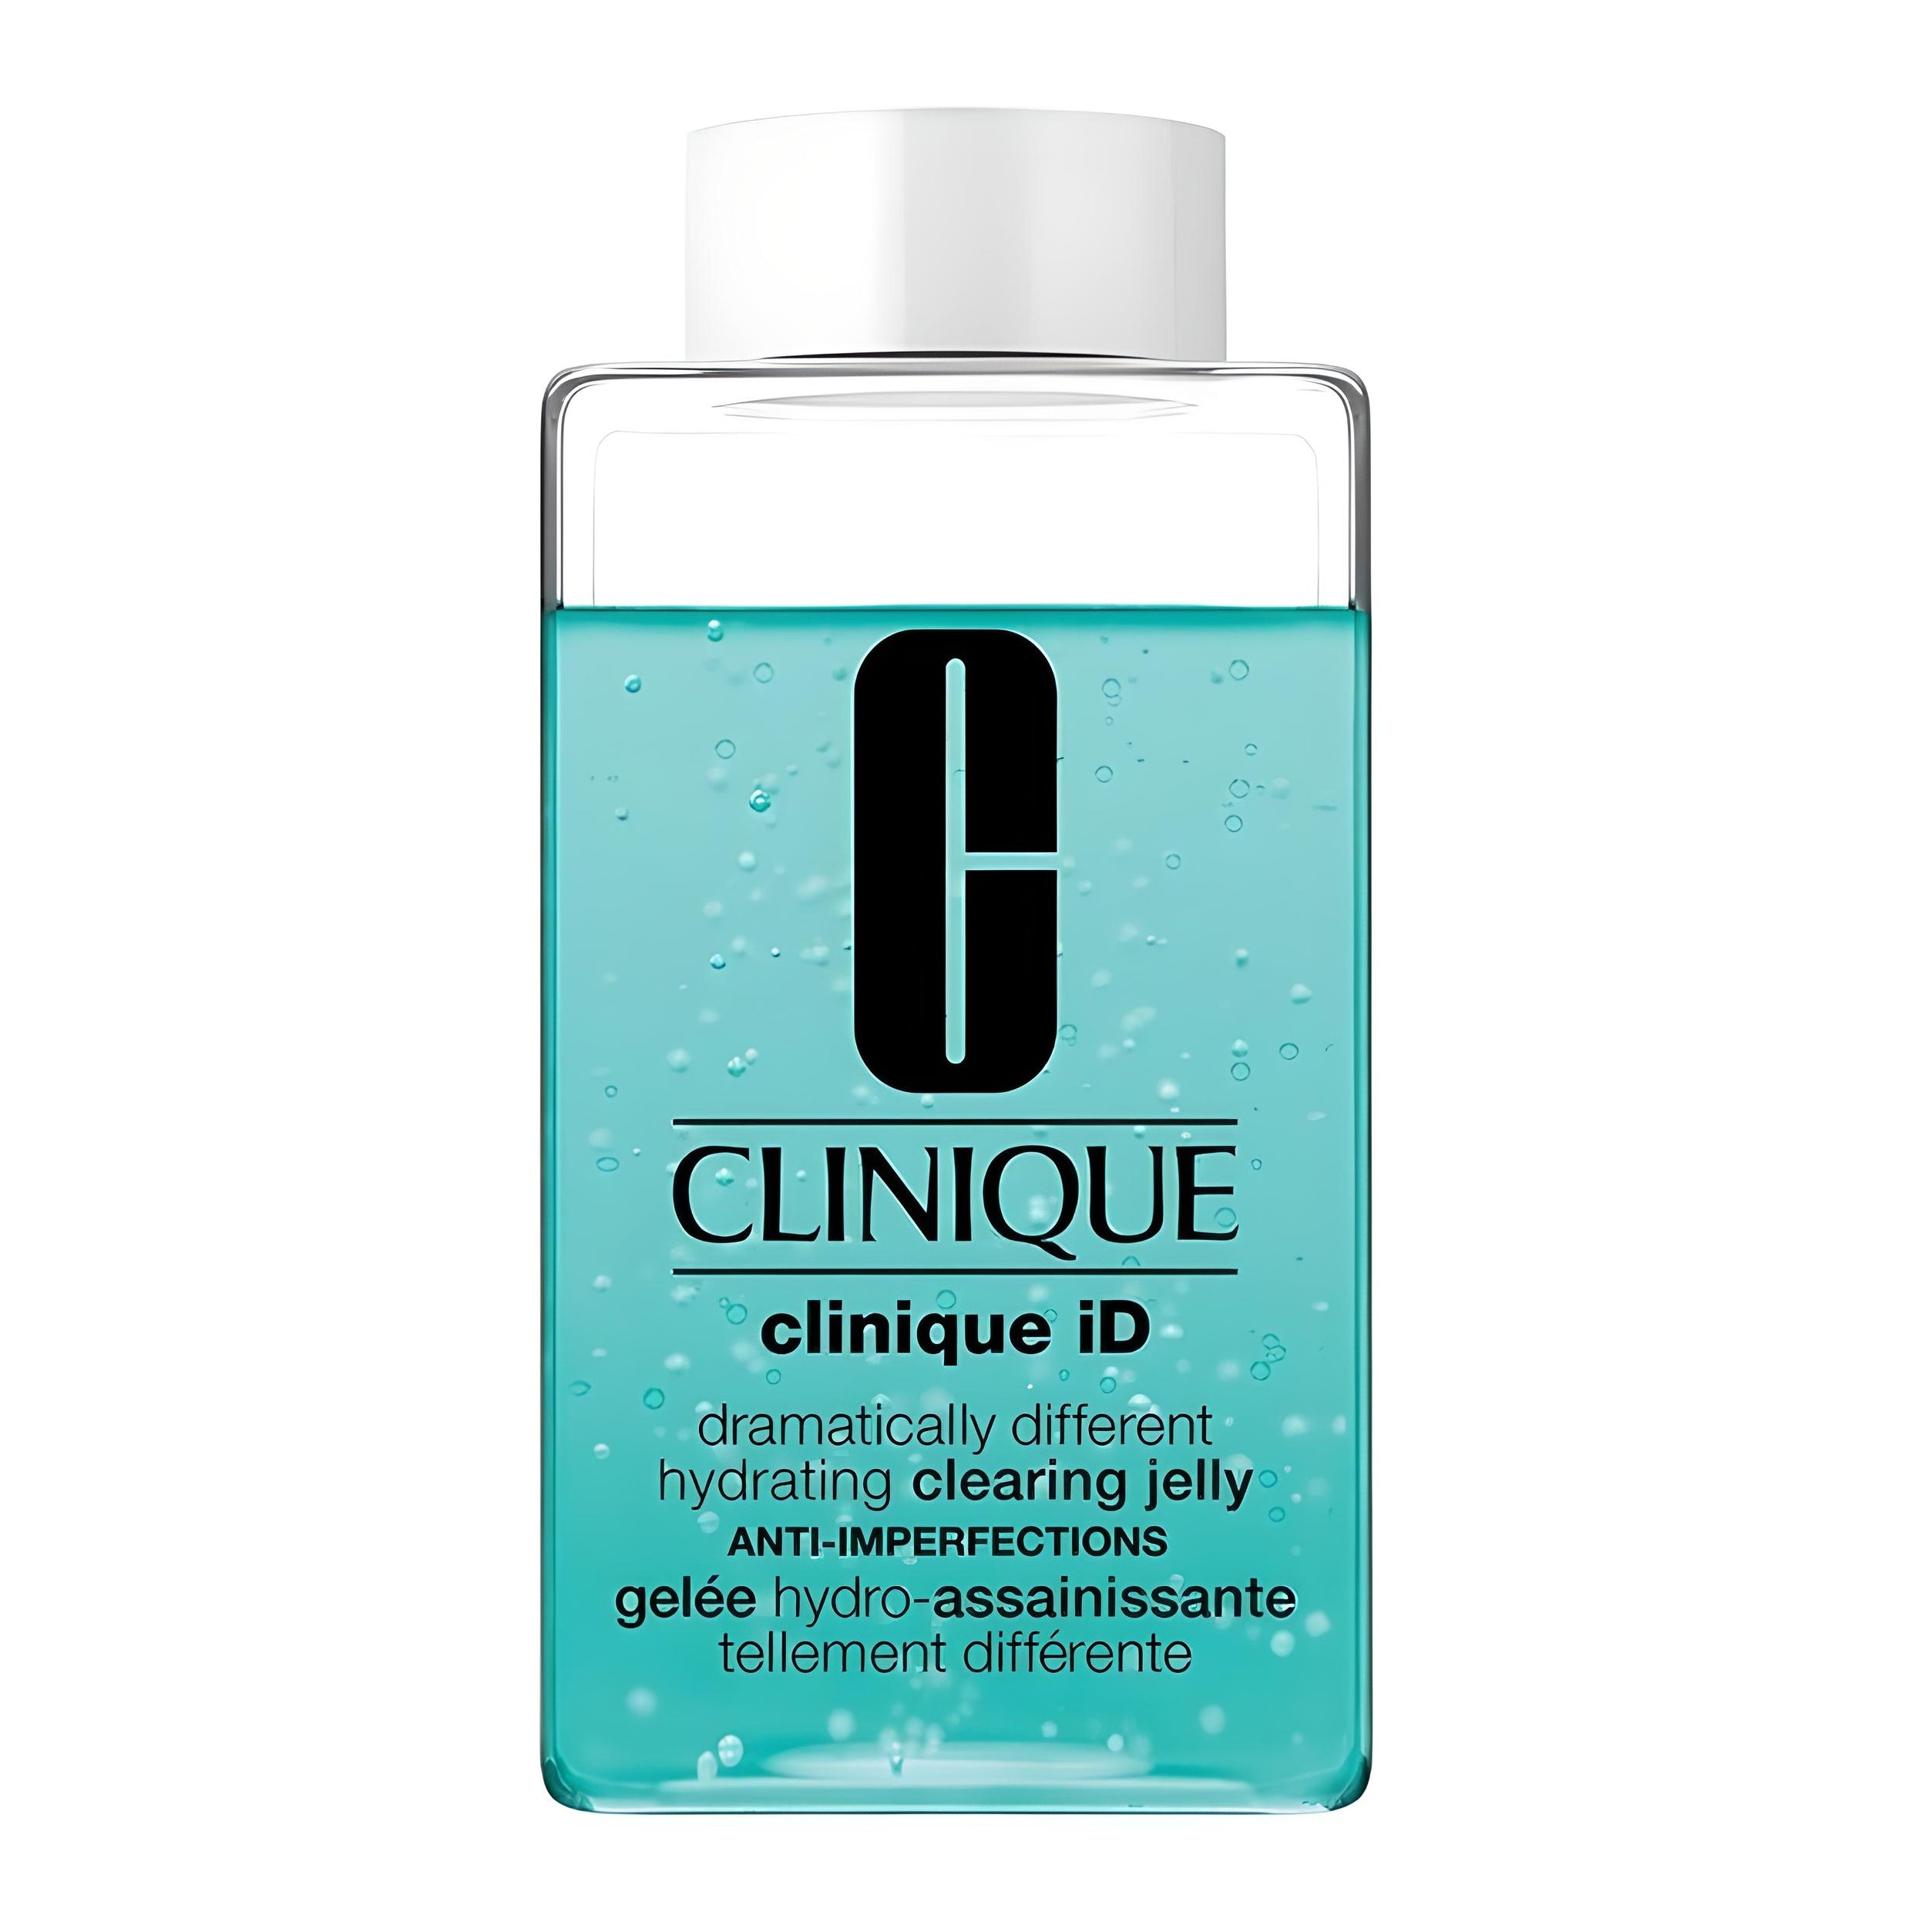 CLINIQUE ID dramatically different anti-imperfections Gesichtspflege CLINIQUE   